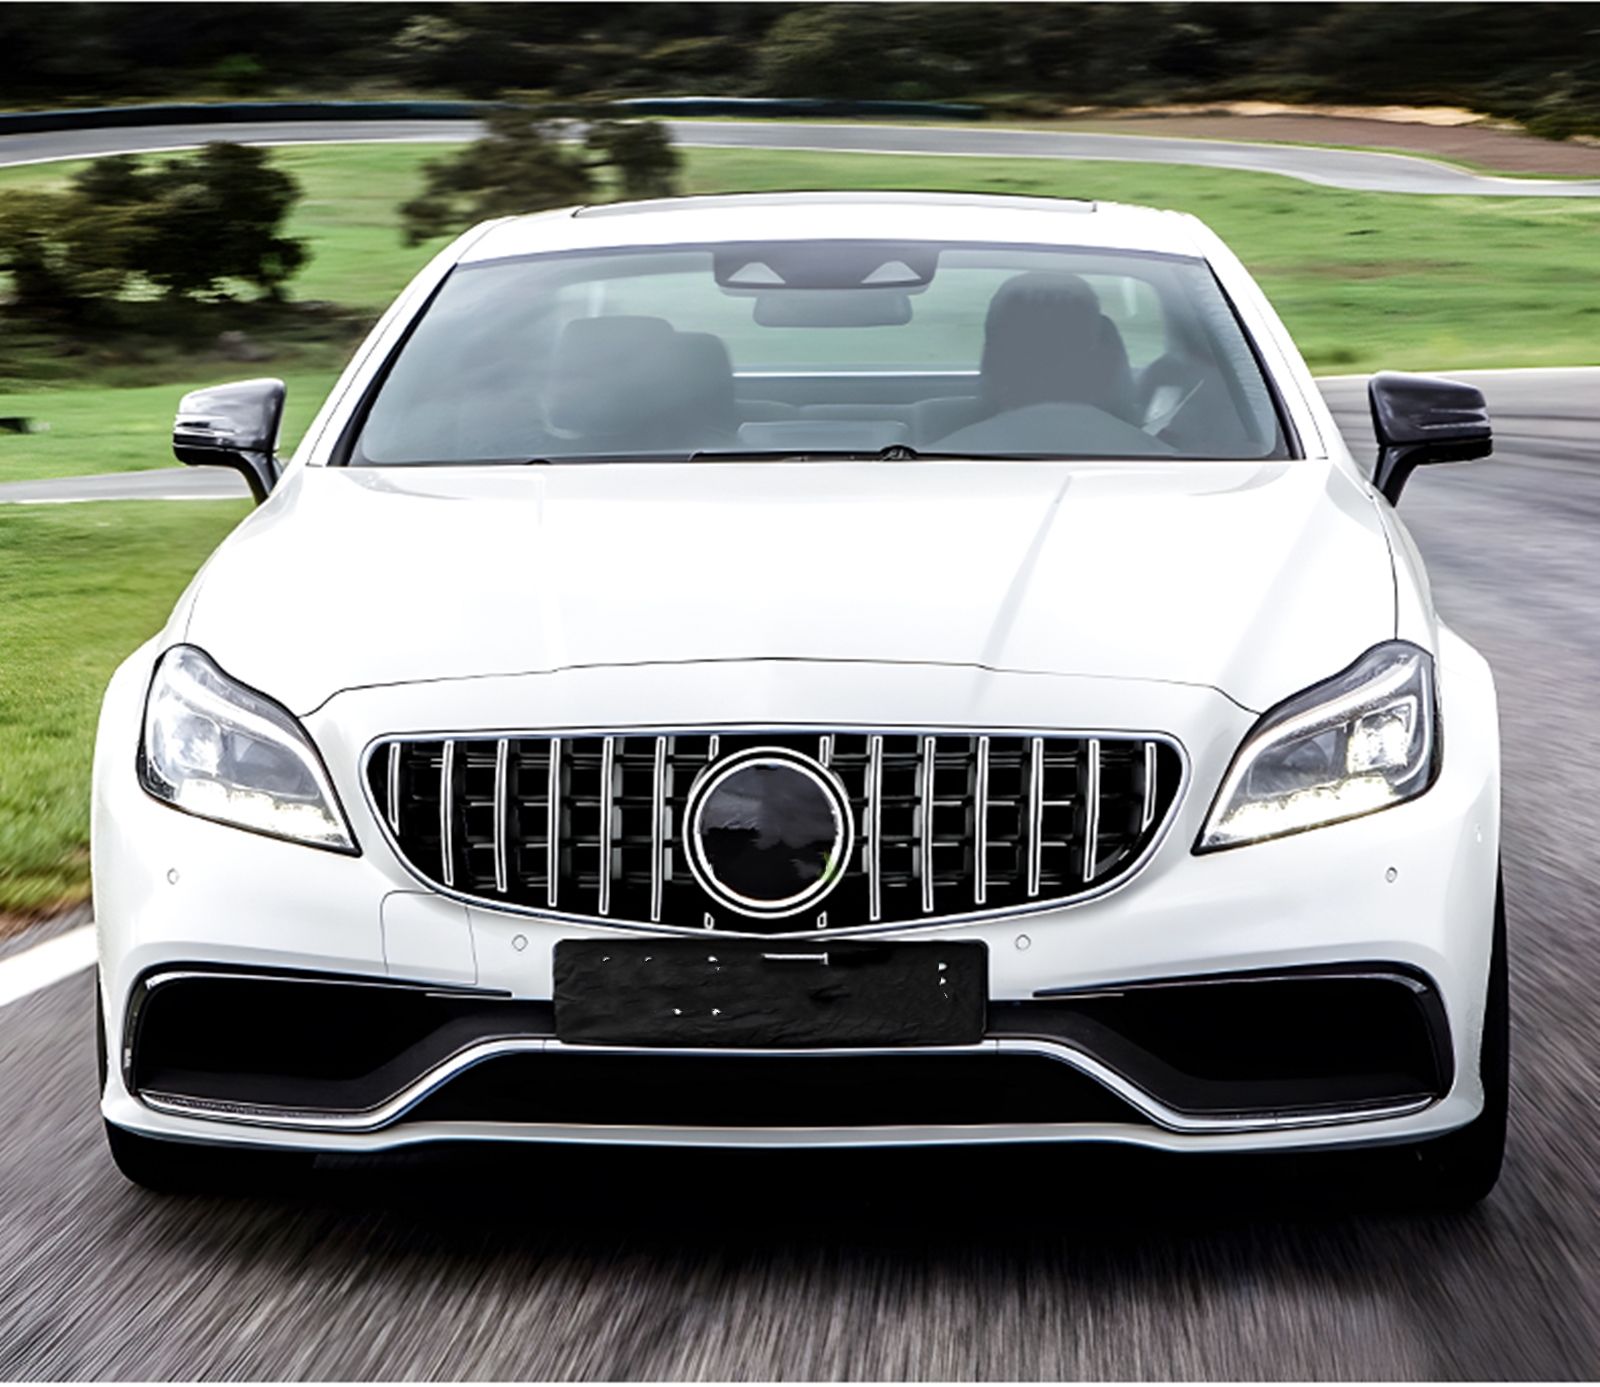 GTR Panamericana AMG Look Front Grill for Mercedes Benz CLS-Class